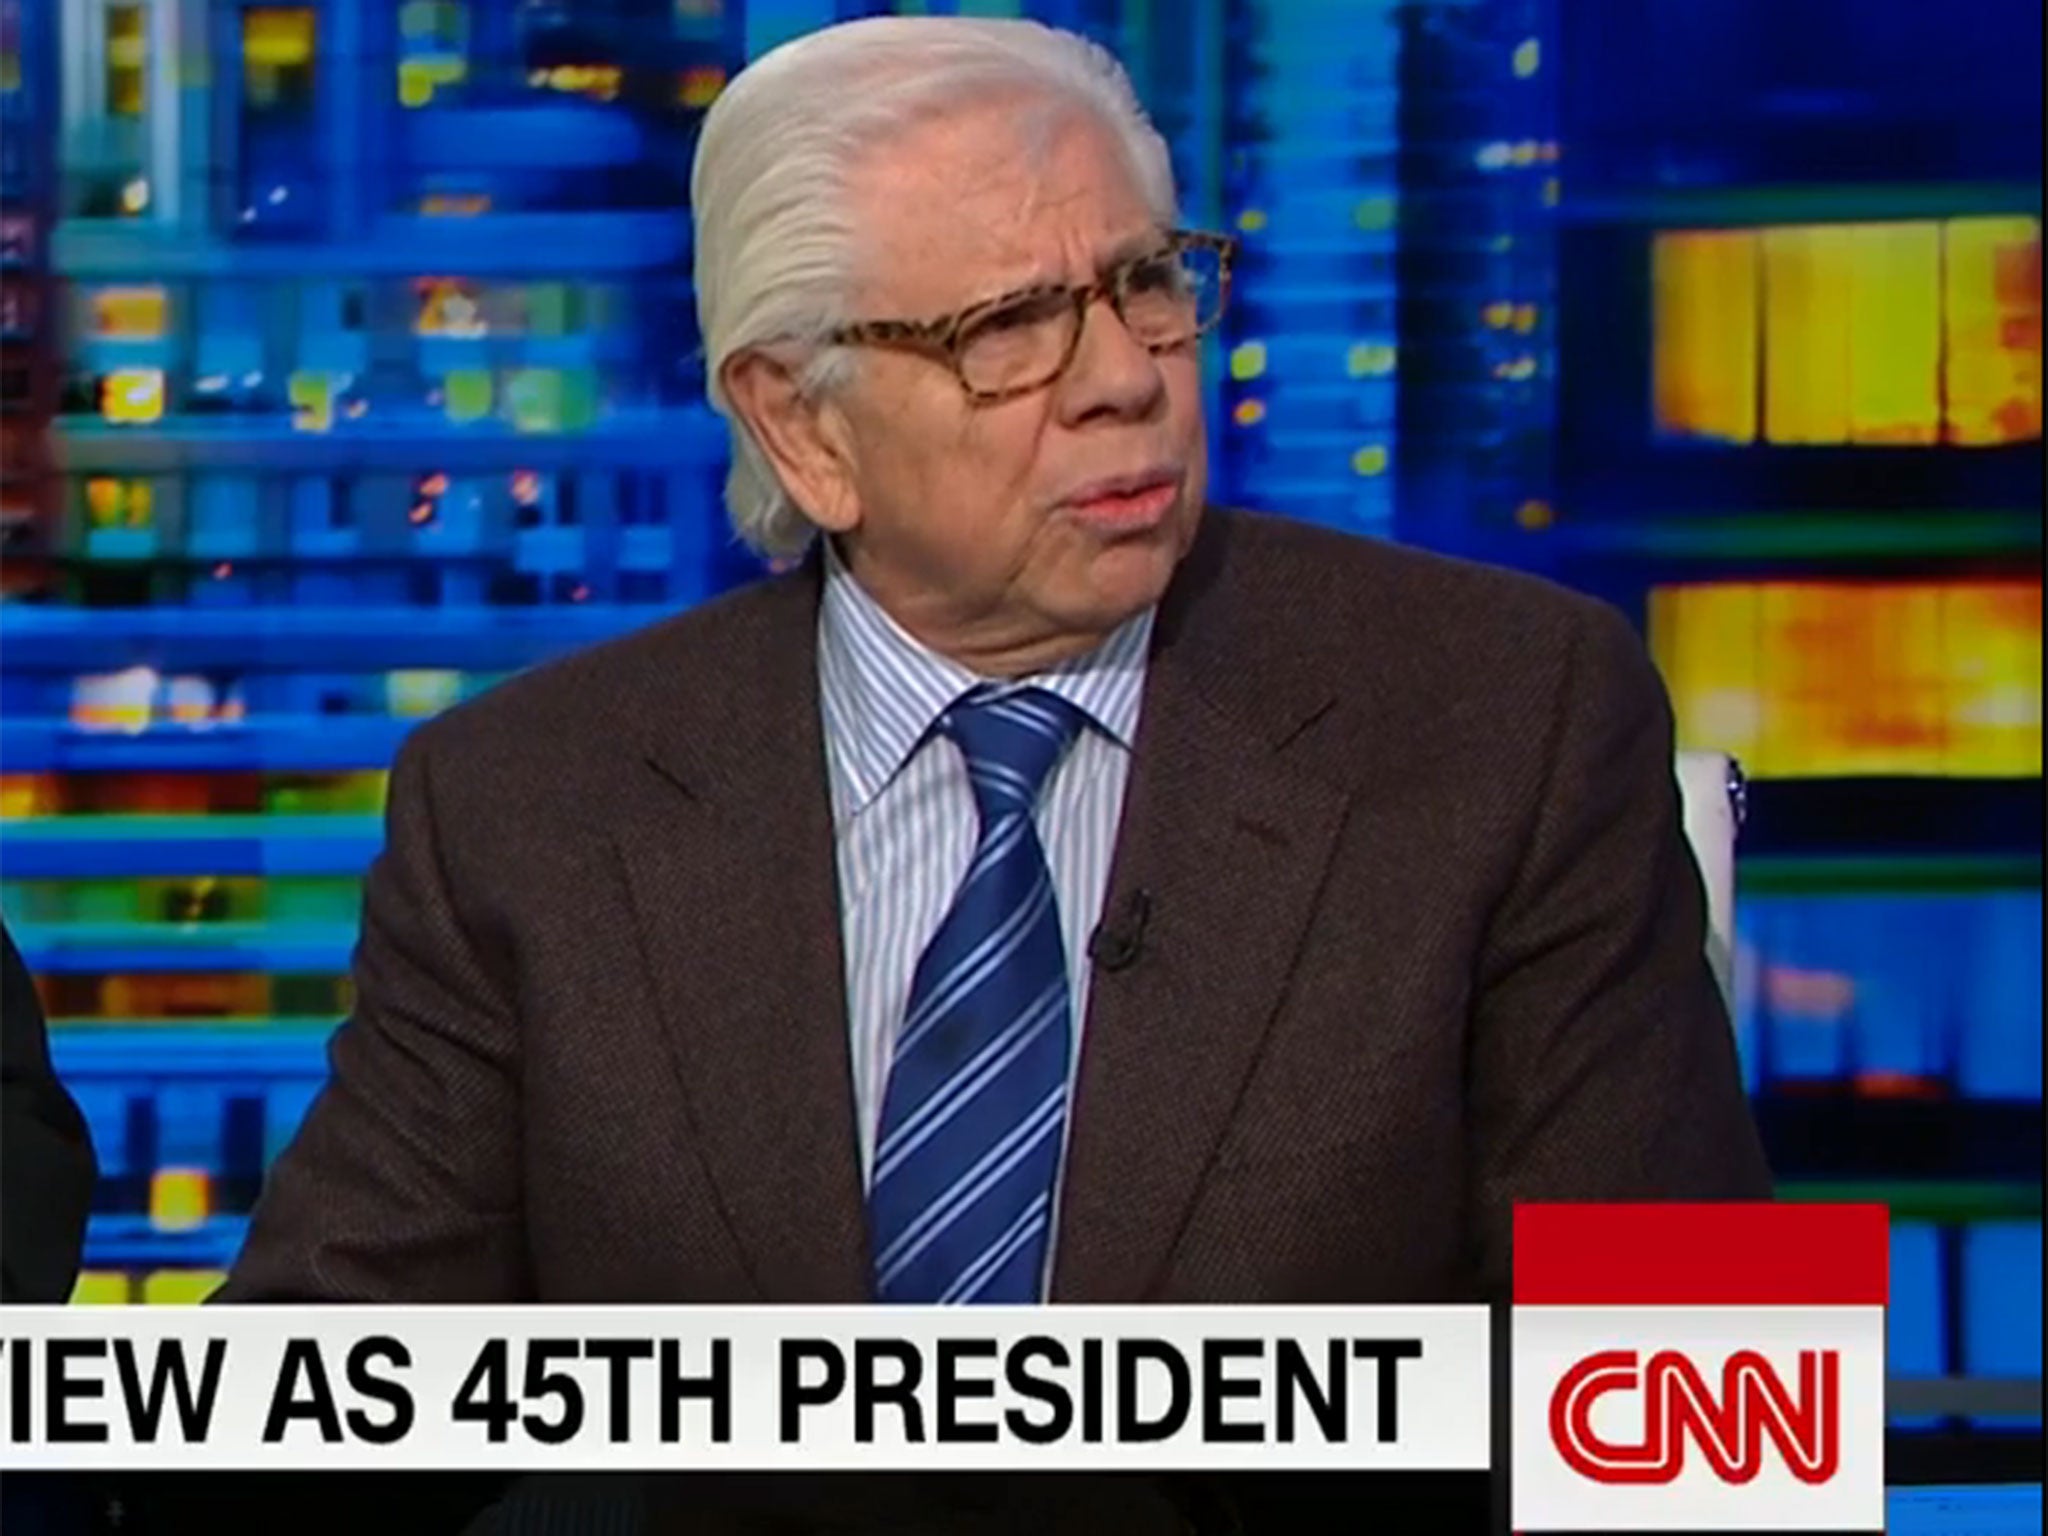 Carl Bernstein told CNN he believes the Trump administration is involved in a 'cover-up'